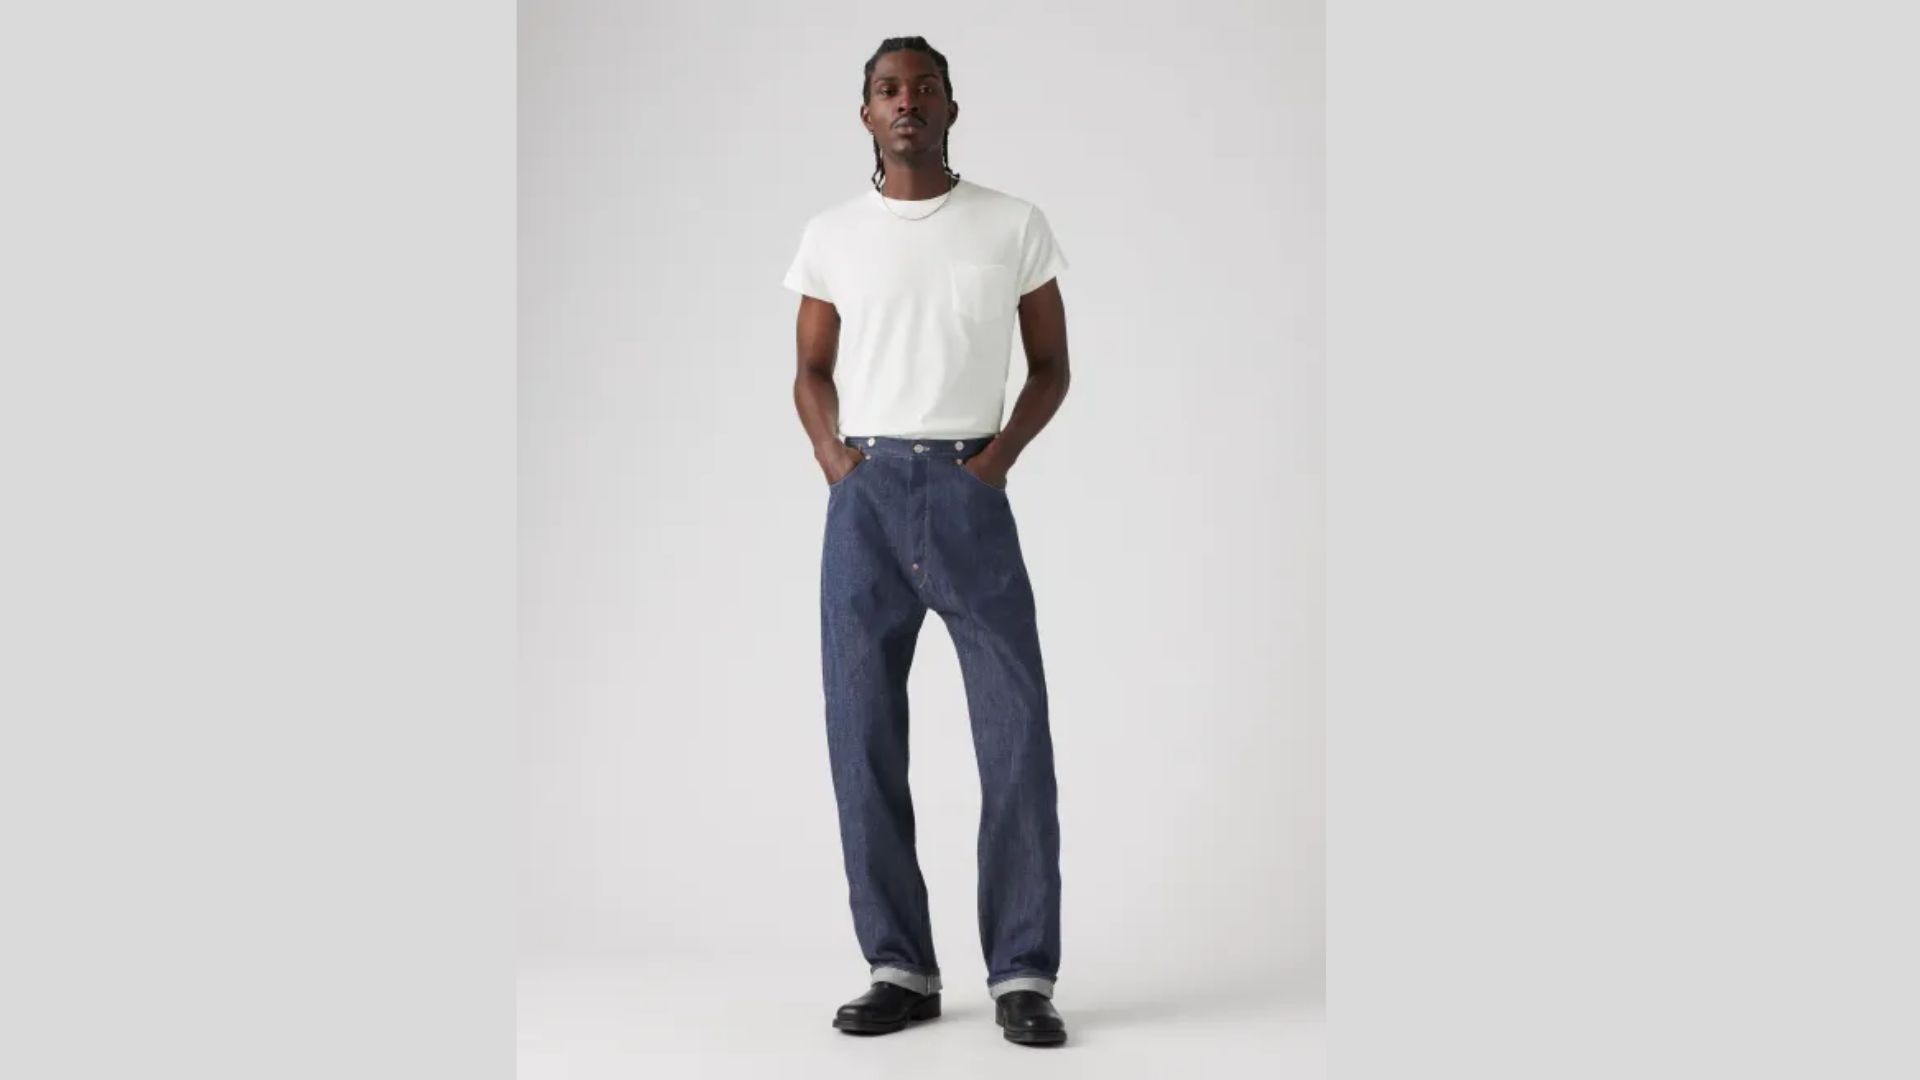 Levi’s vintage clothing reproduces its oldest archival jean